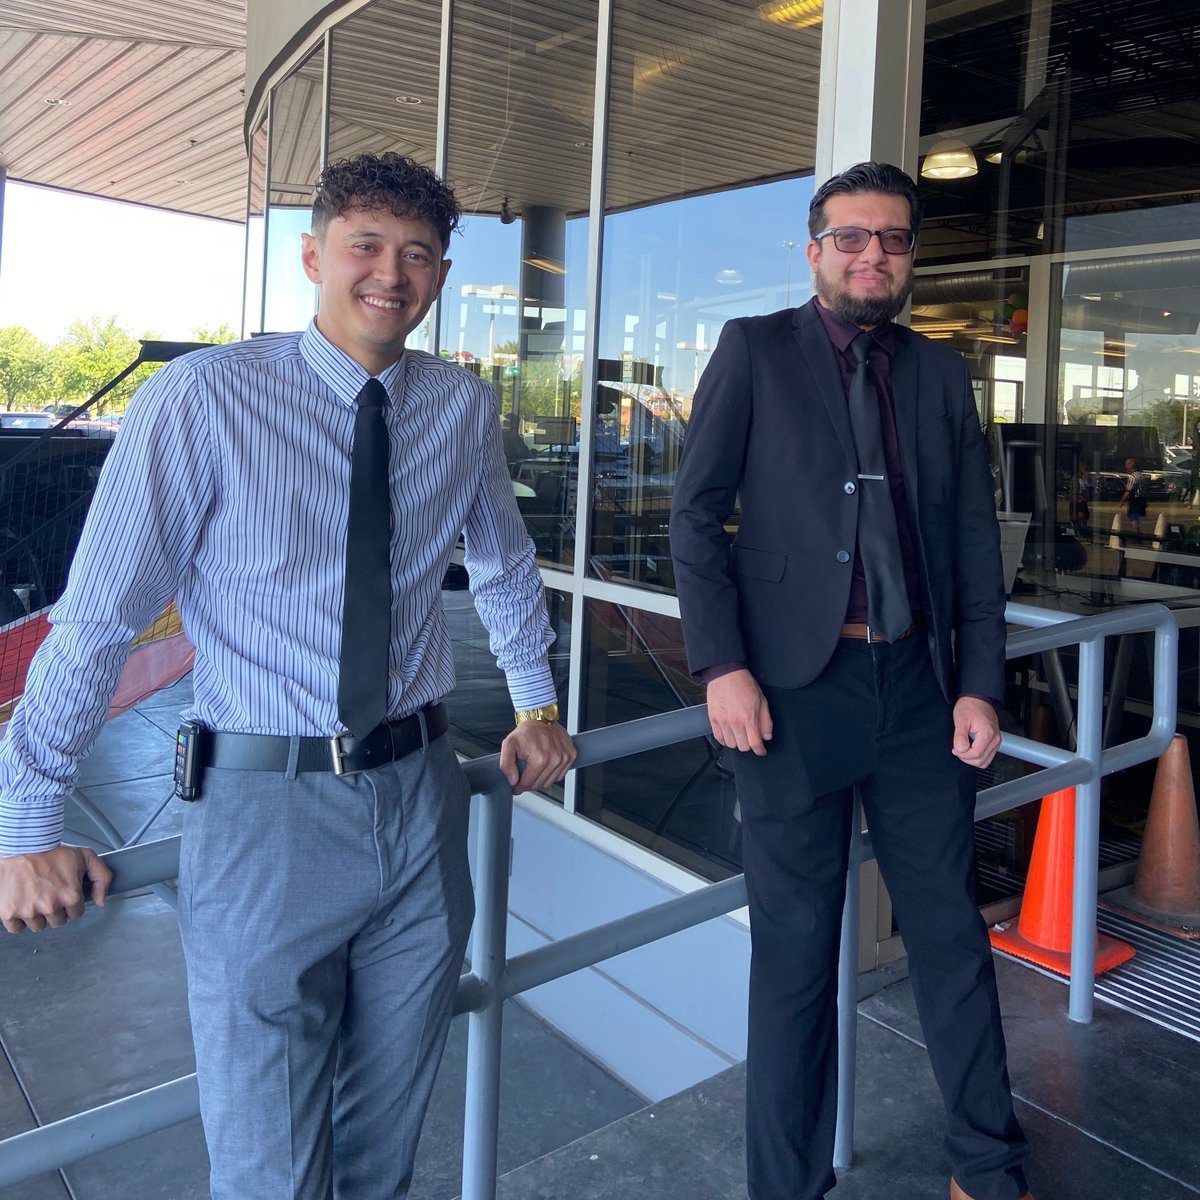 The car buying process doesn't have to be stressful - our expert sales team is here for you every step of the way!

#BillLukeCJDR #PhoenixCars #SalesTeam #FamilyOwned #FamilyOperated #Salesmen #CarSales